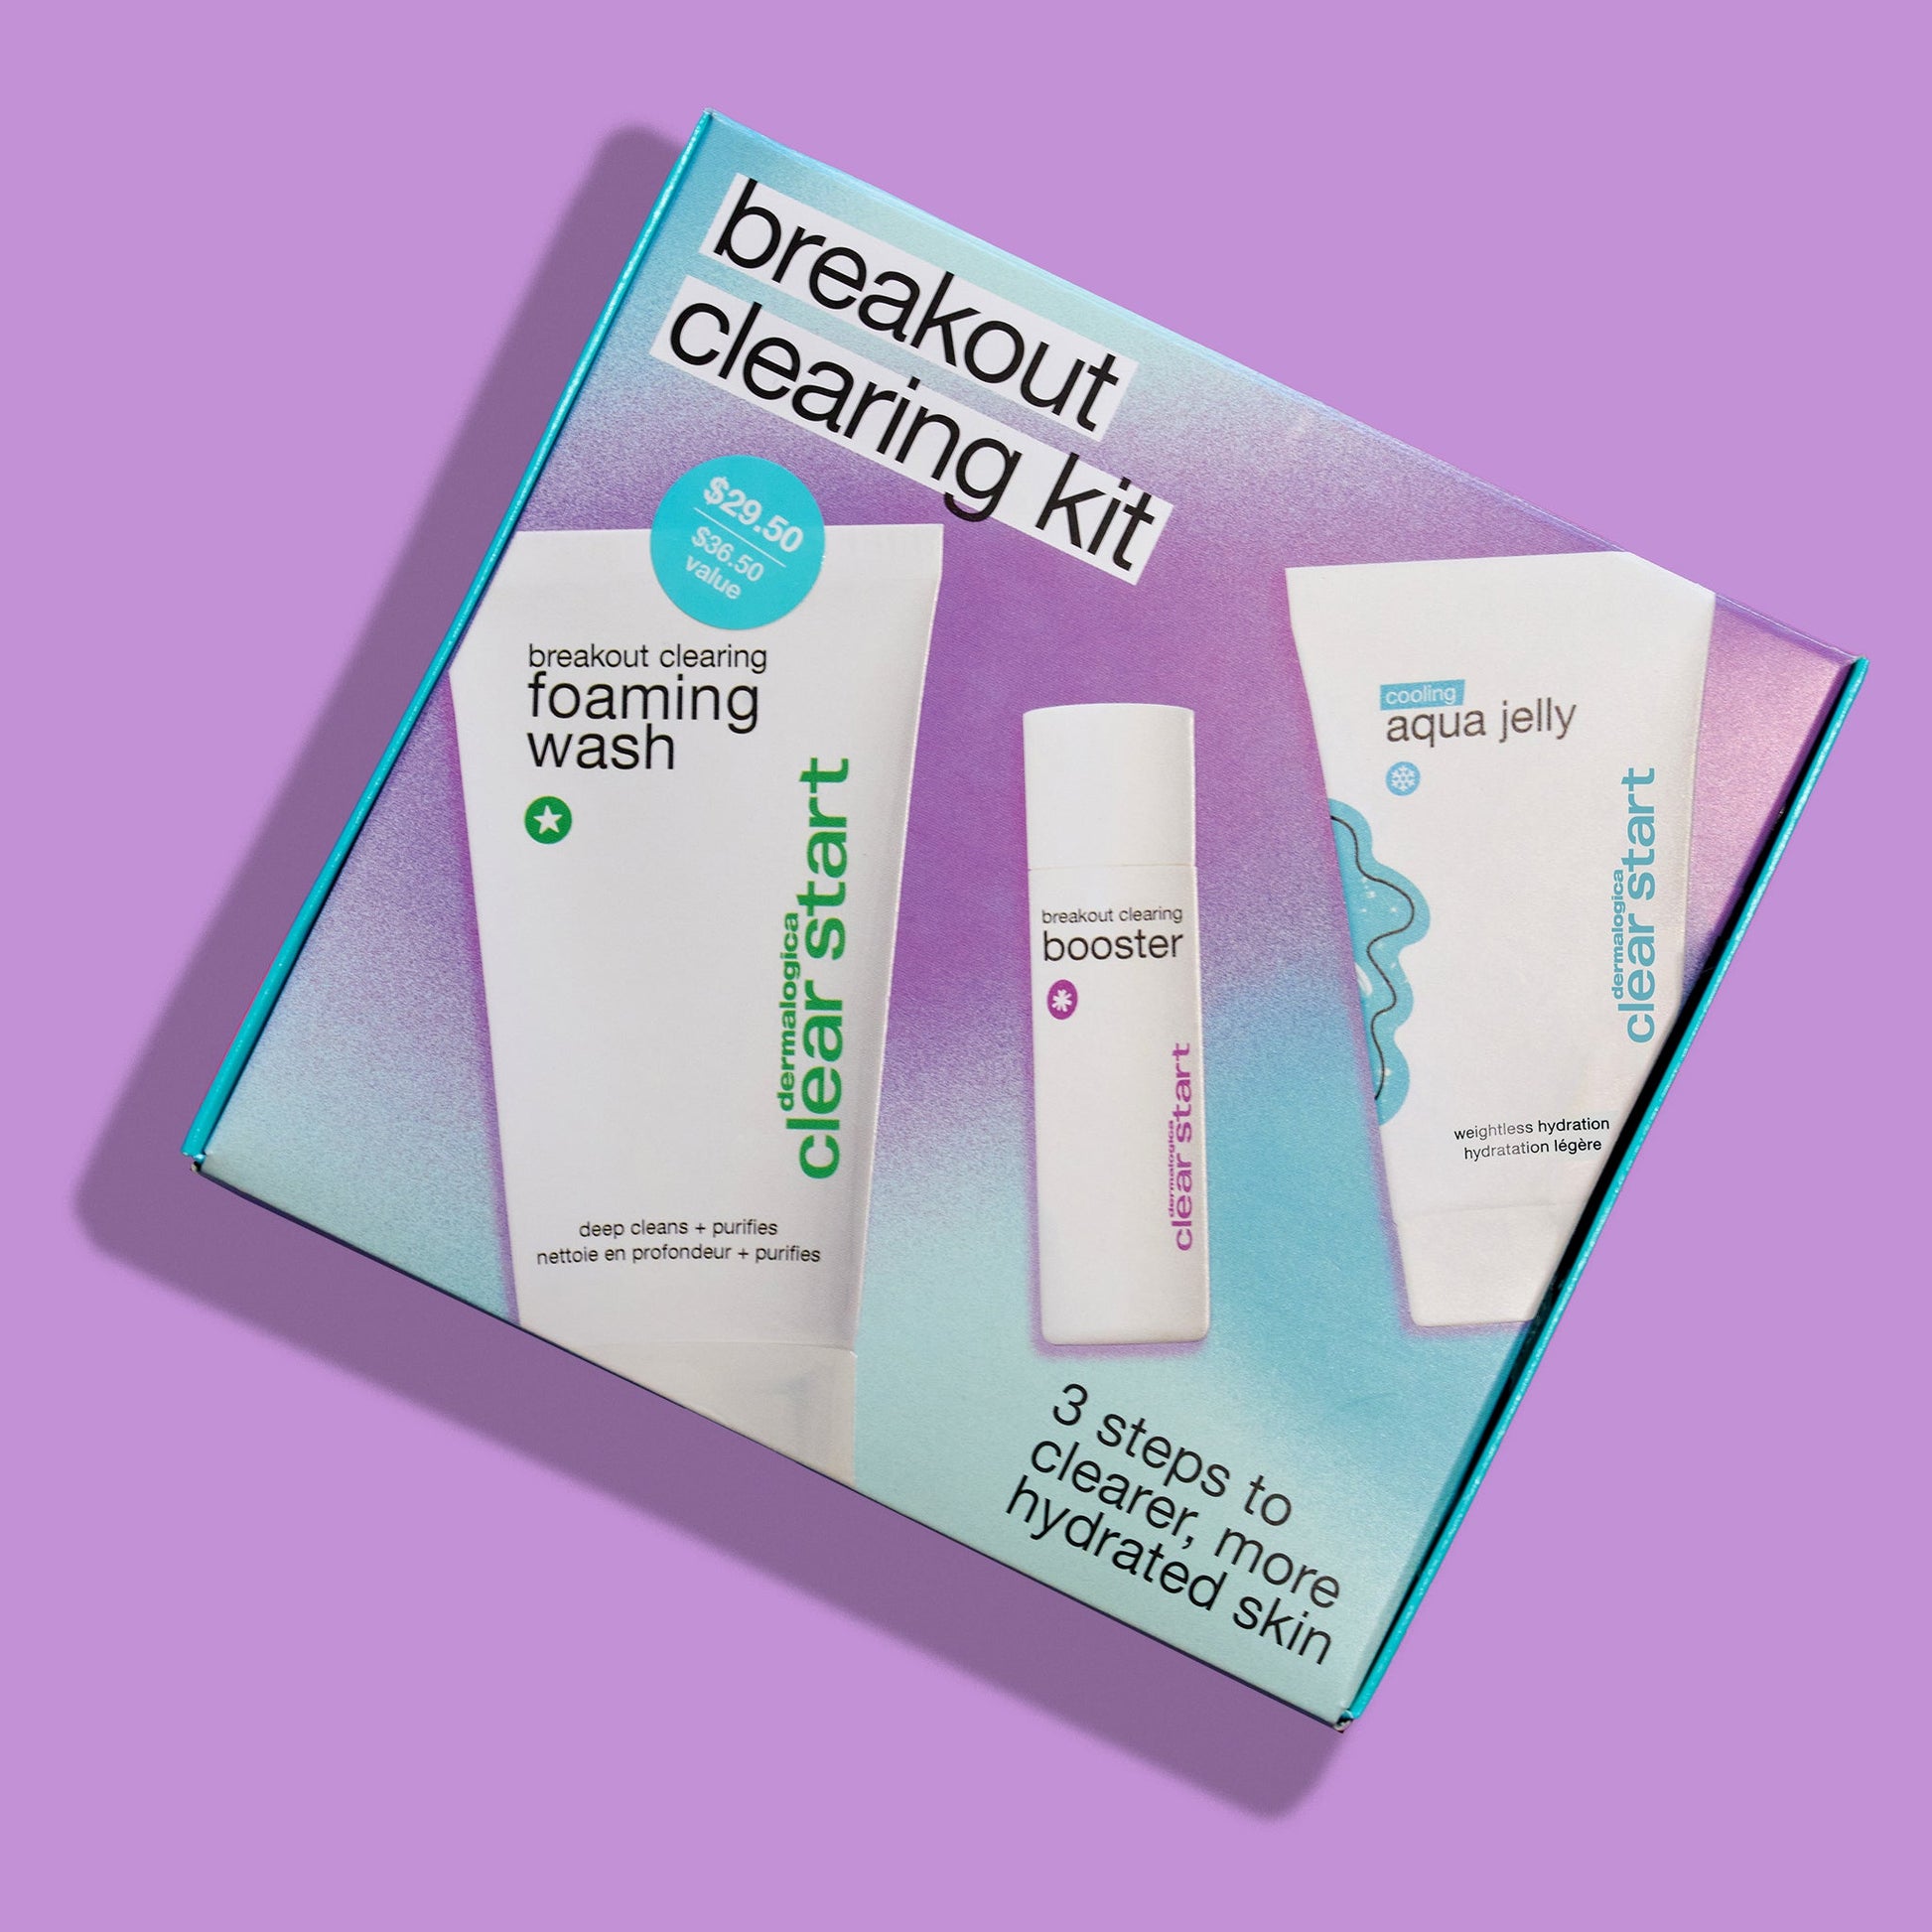 Breakout Clearing Kit on purple background